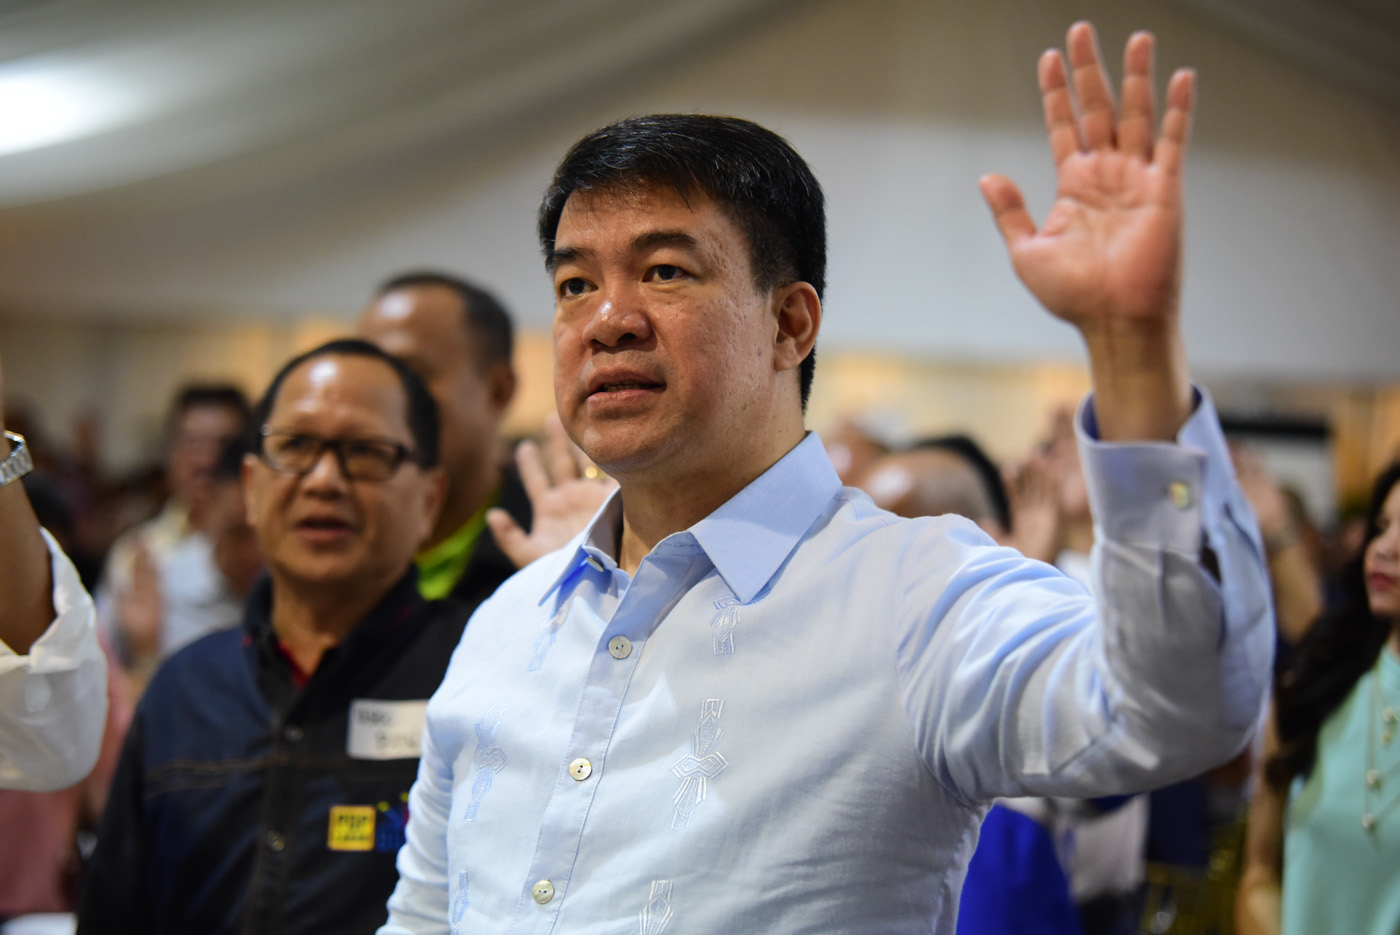 2019 POLLS. Senate President Aquilino Pimentel III is eyeing a reelection bid in 2019 amid possible legal issues around his candidacy. File photo by Alecs Ongcal/Rappler 